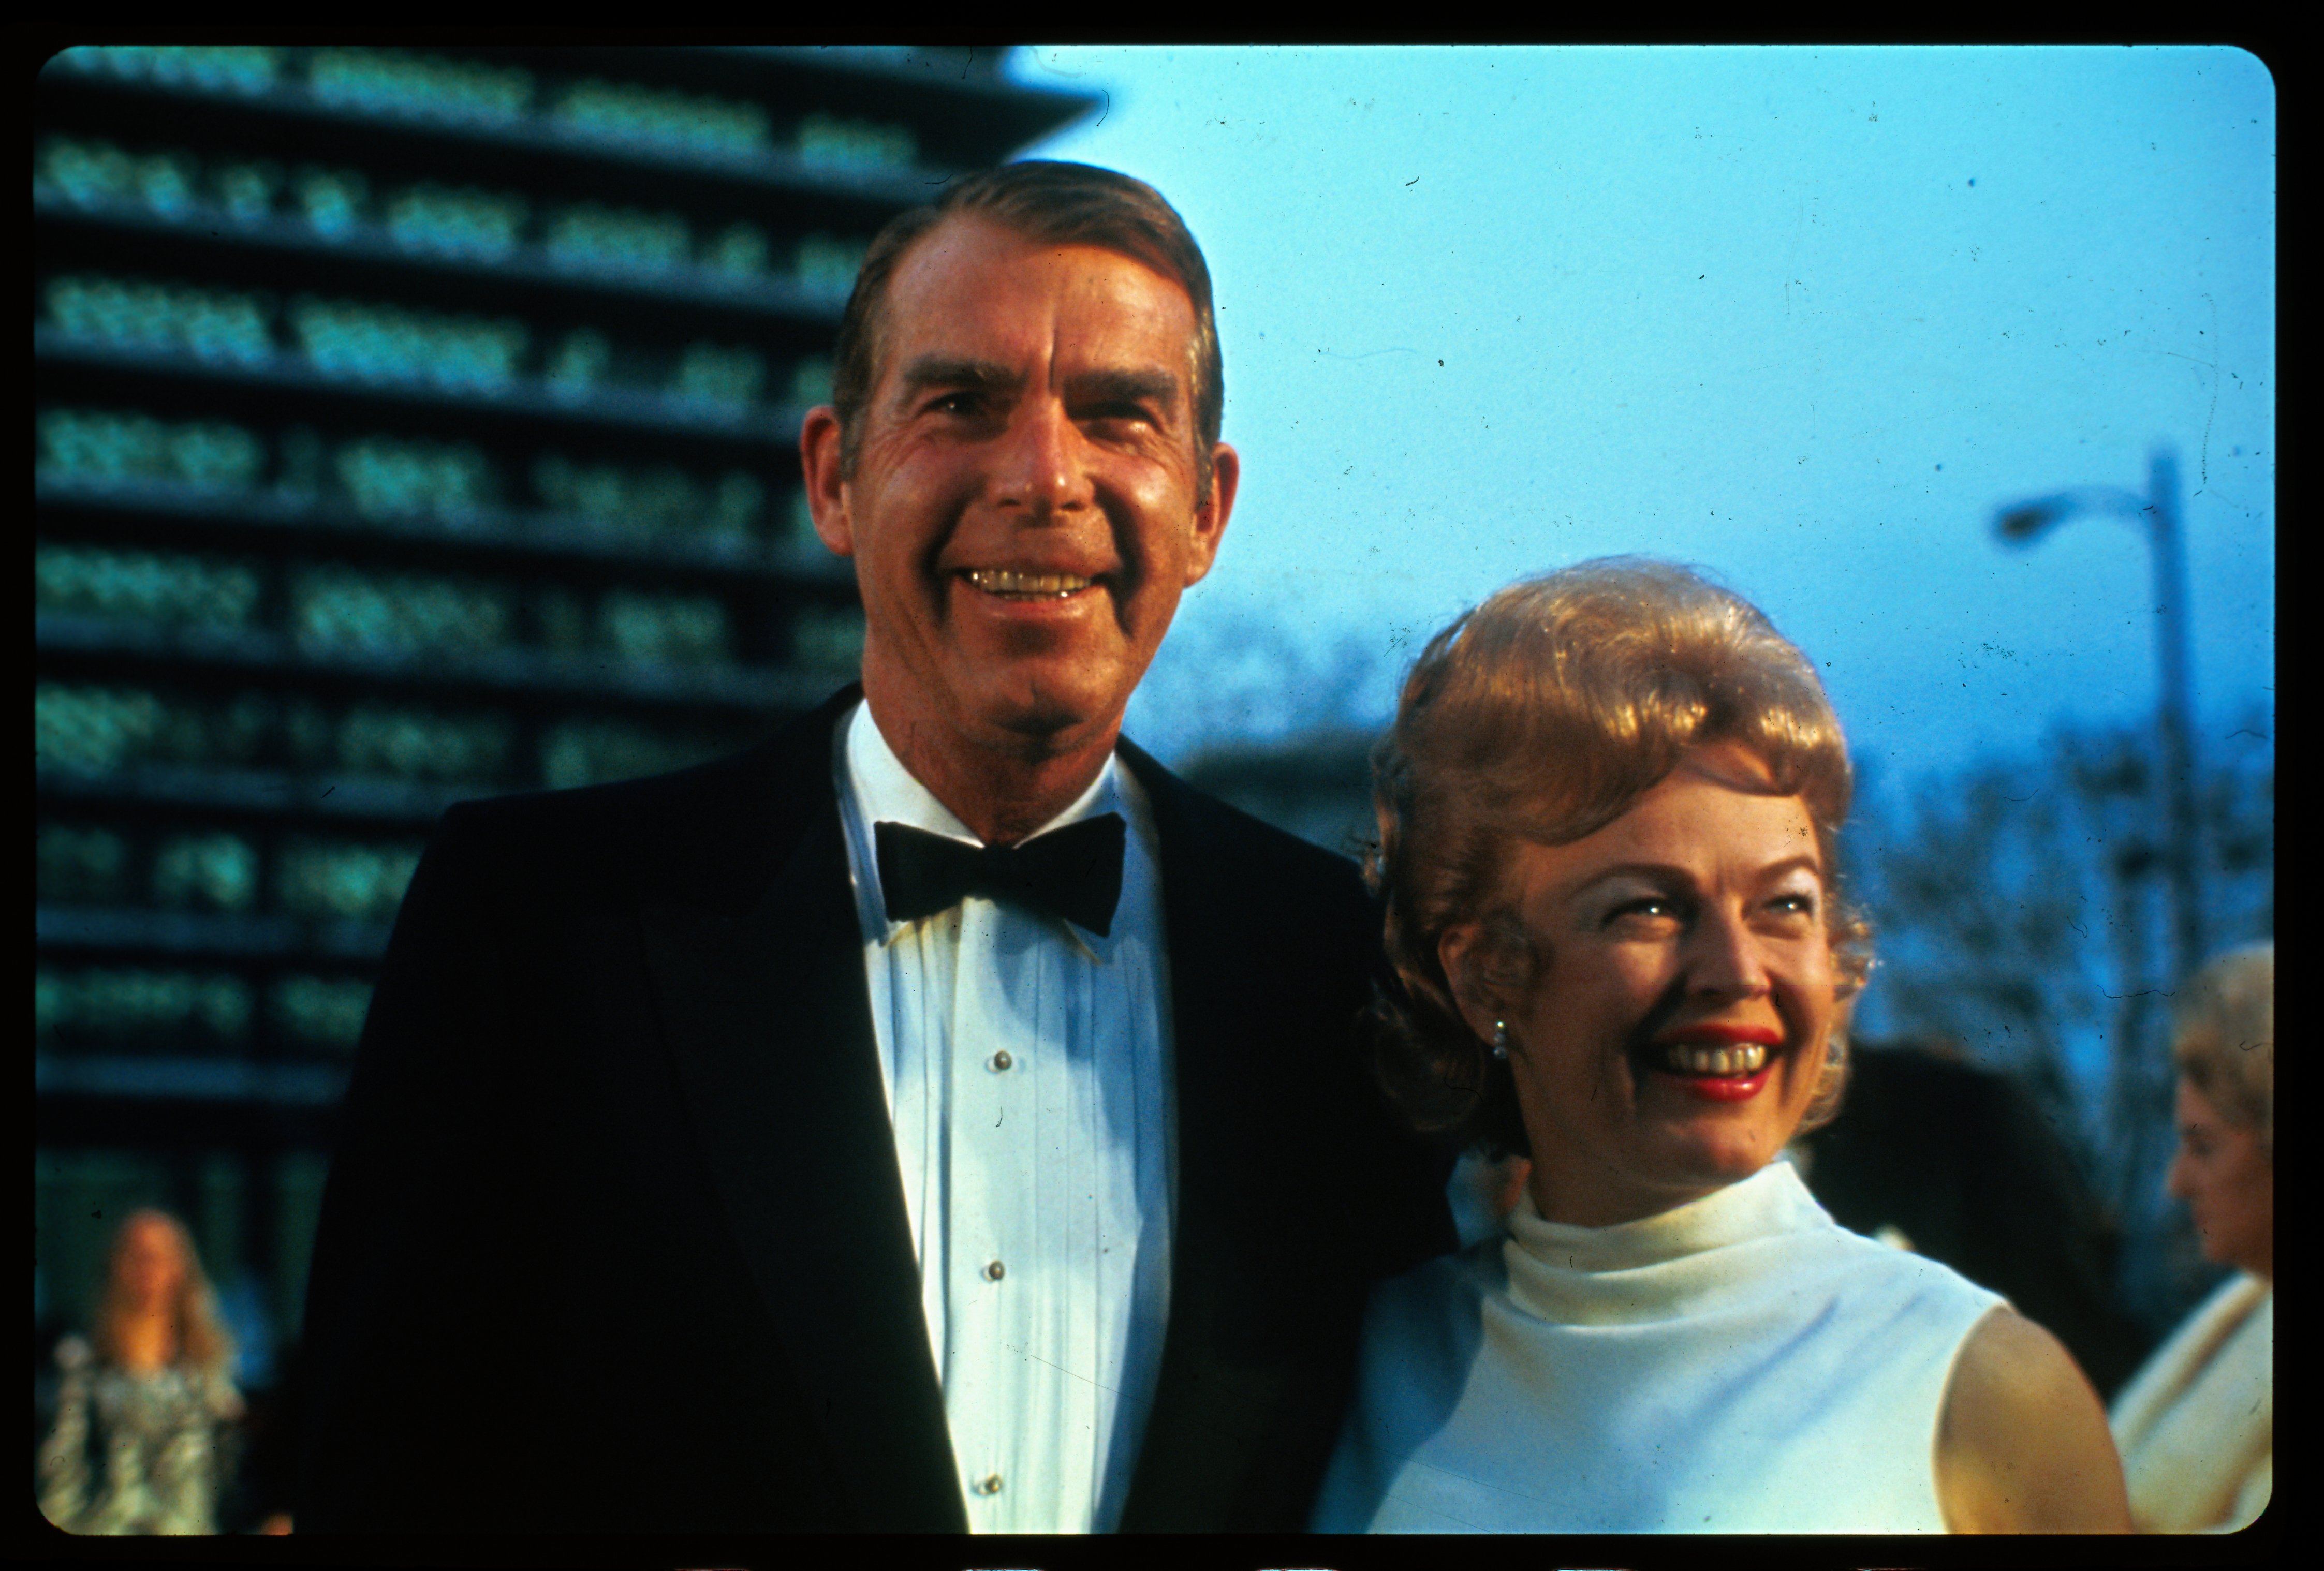 Fred MacMurray and his wife, former actress June Haver, arrive at the Academy Awards presentations. | Source: Getty Images